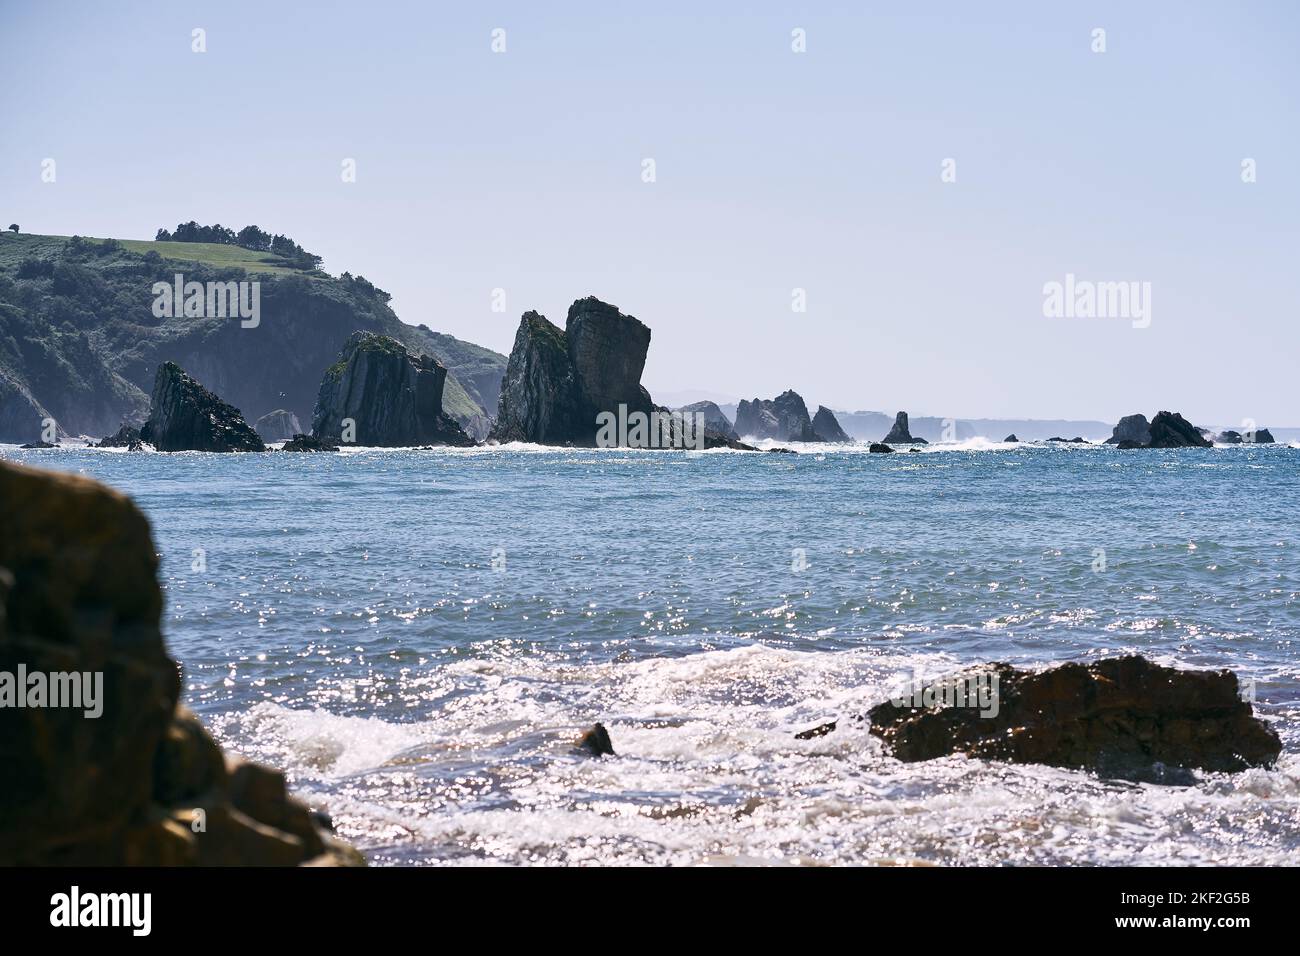 landscape of the cantabrian sea with big rocks near the green cliffs shining by the sun in a calm and lonely place, asturias, spain Stock Photo